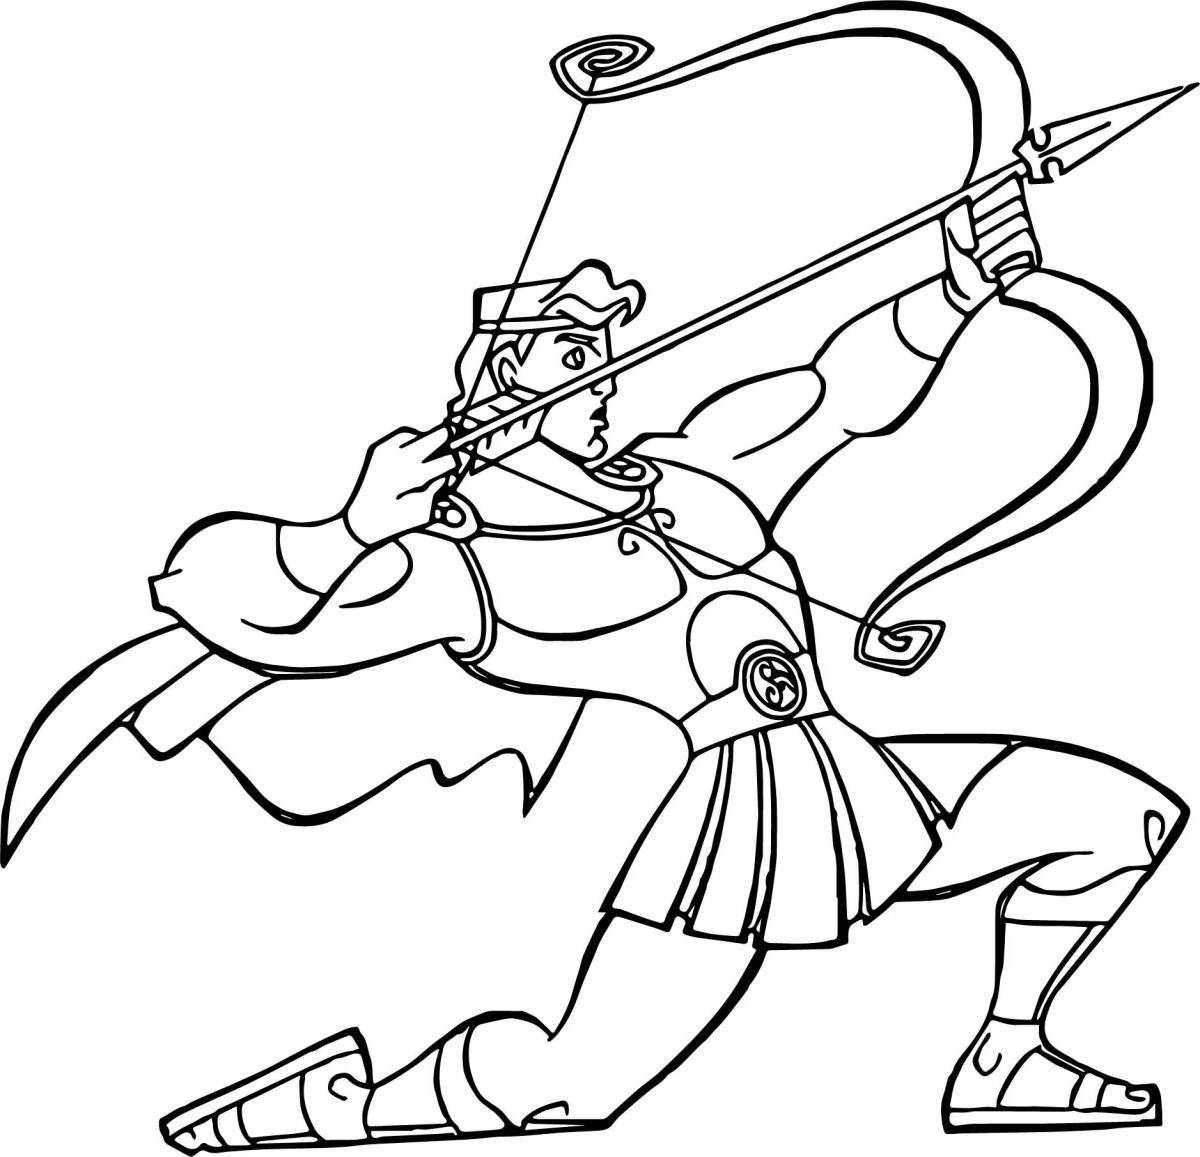 Coloring book fearless archer